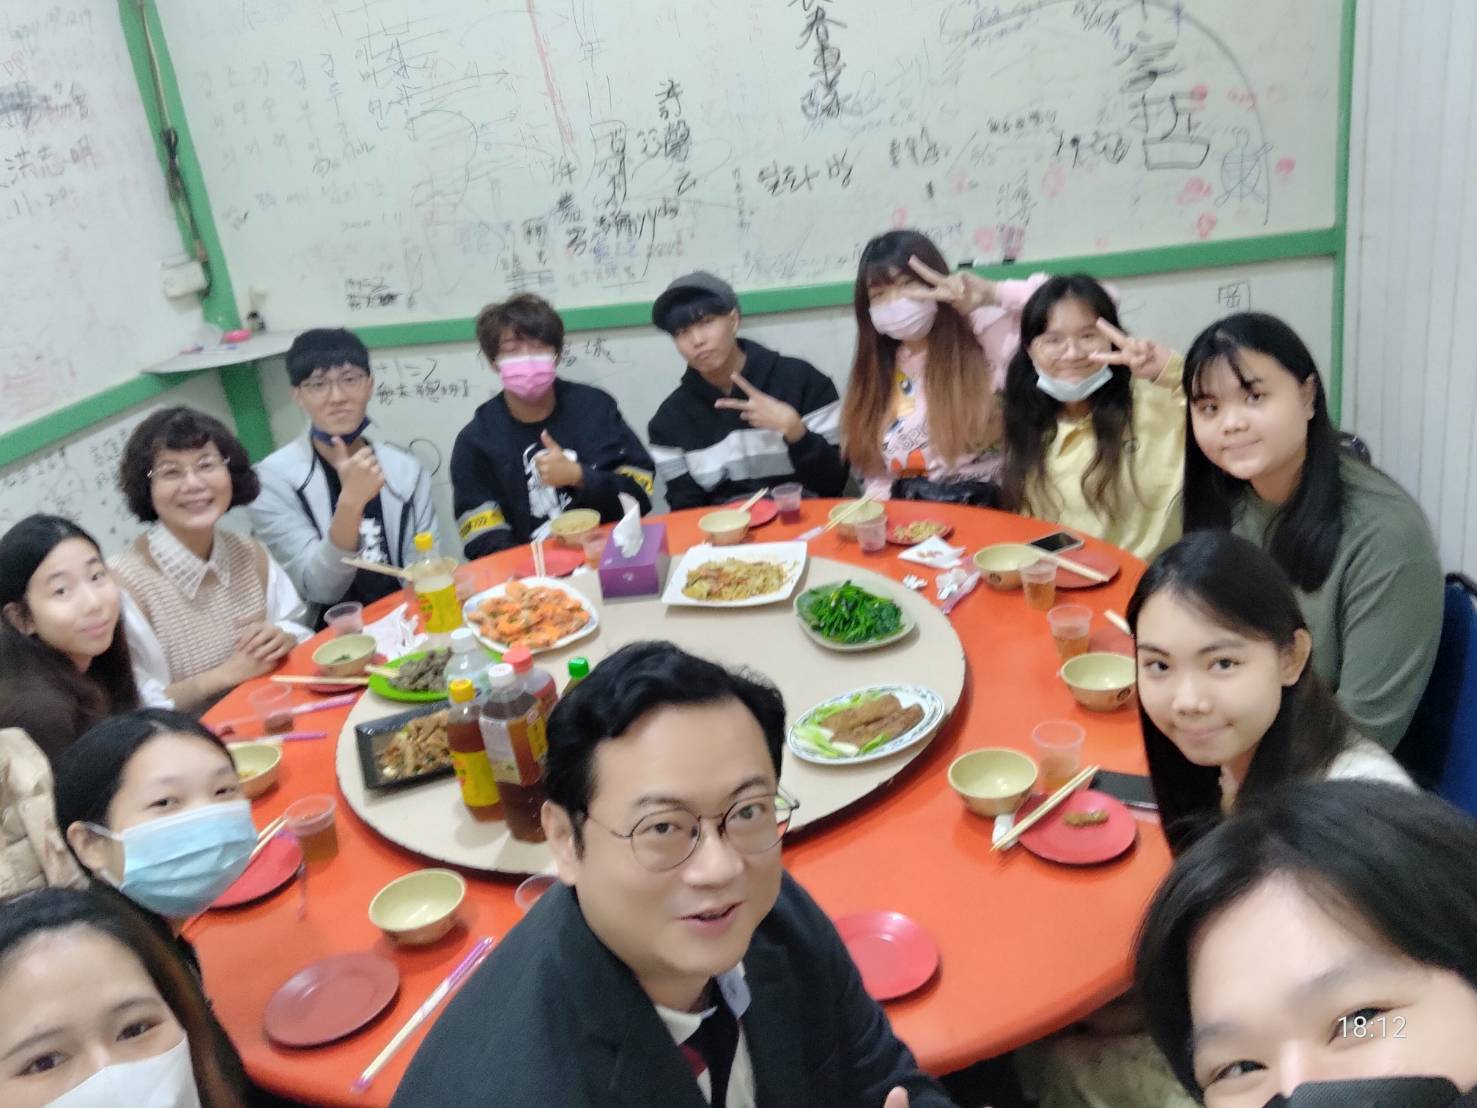 Yueh-Tuan Chen and Shyh-Fang Liu treated overseas students the reunion dinner 01